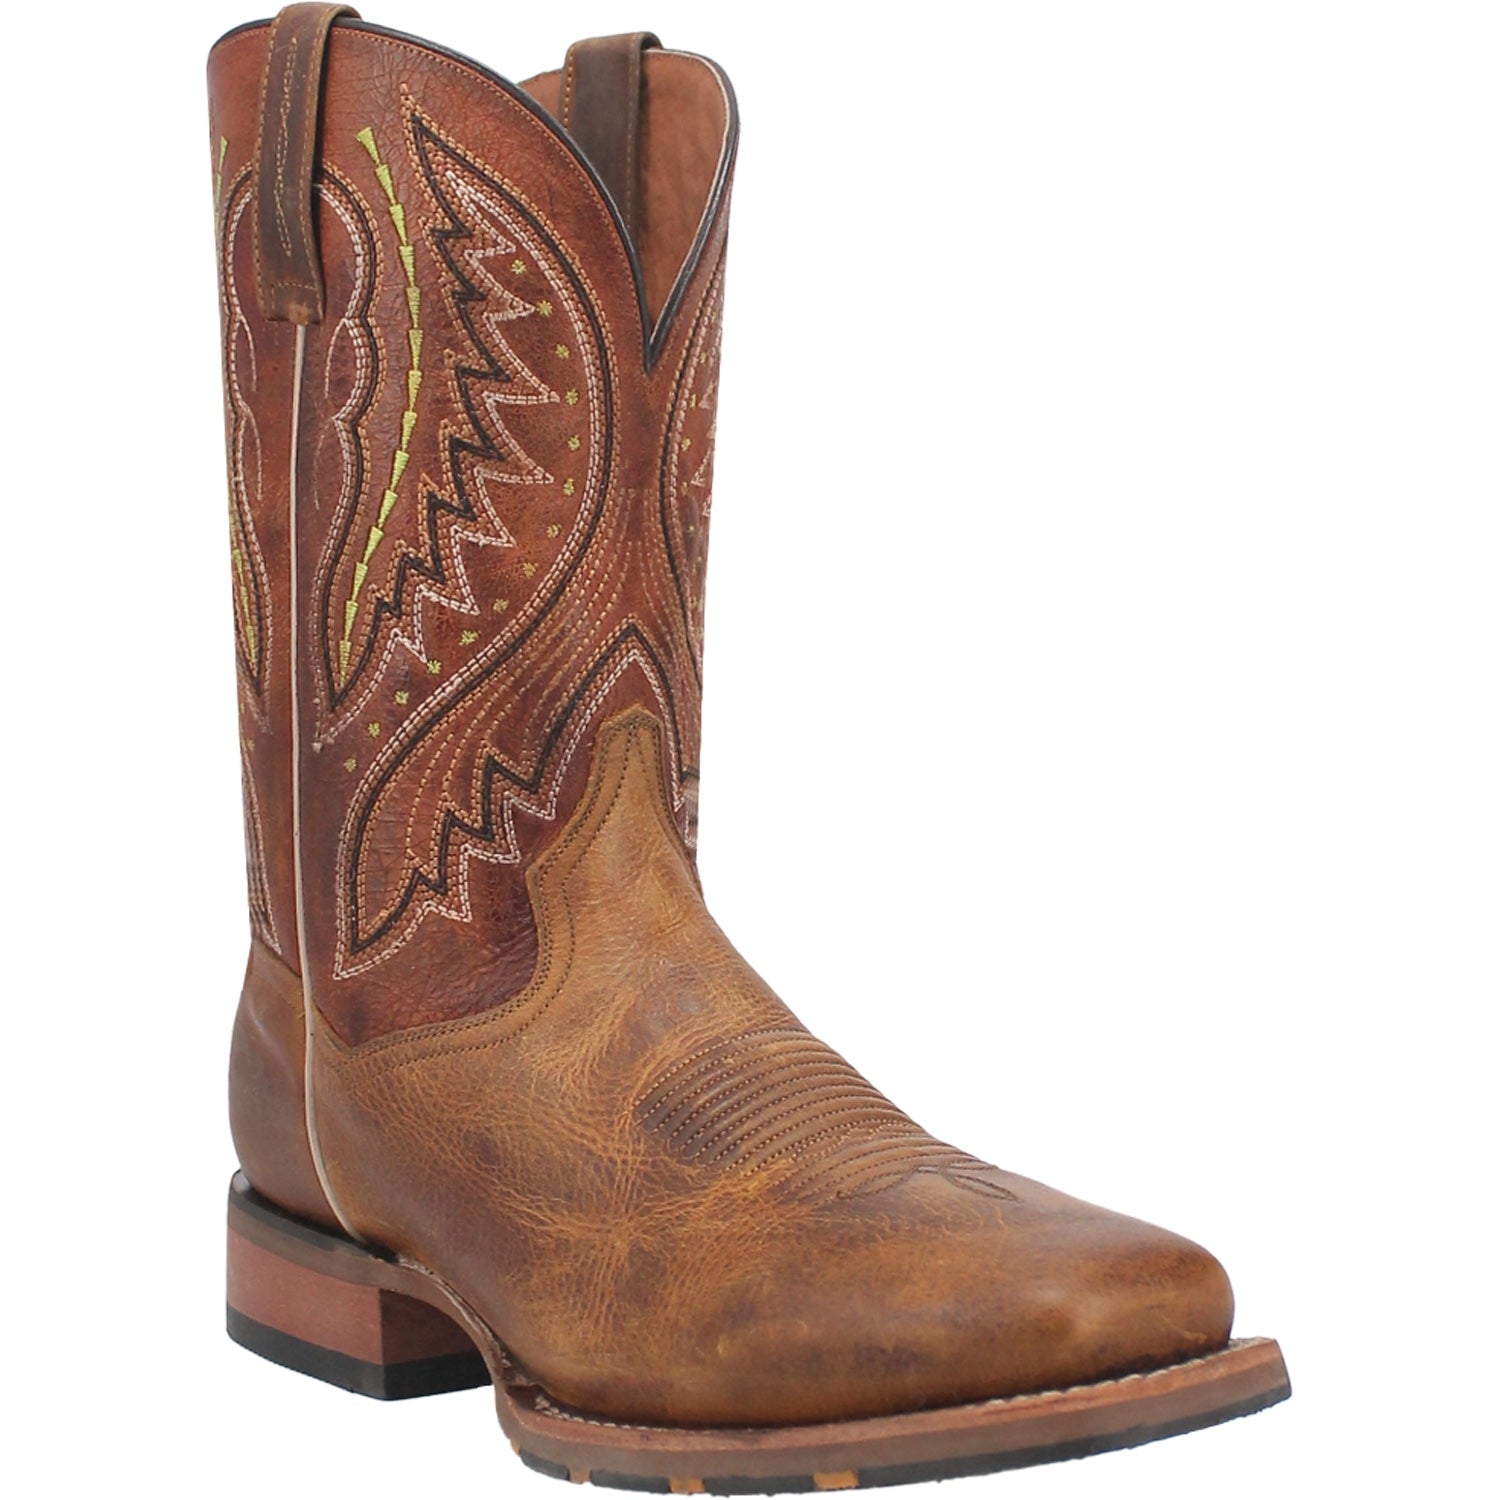 DUGAN BISON LEATHER BOOT Cover